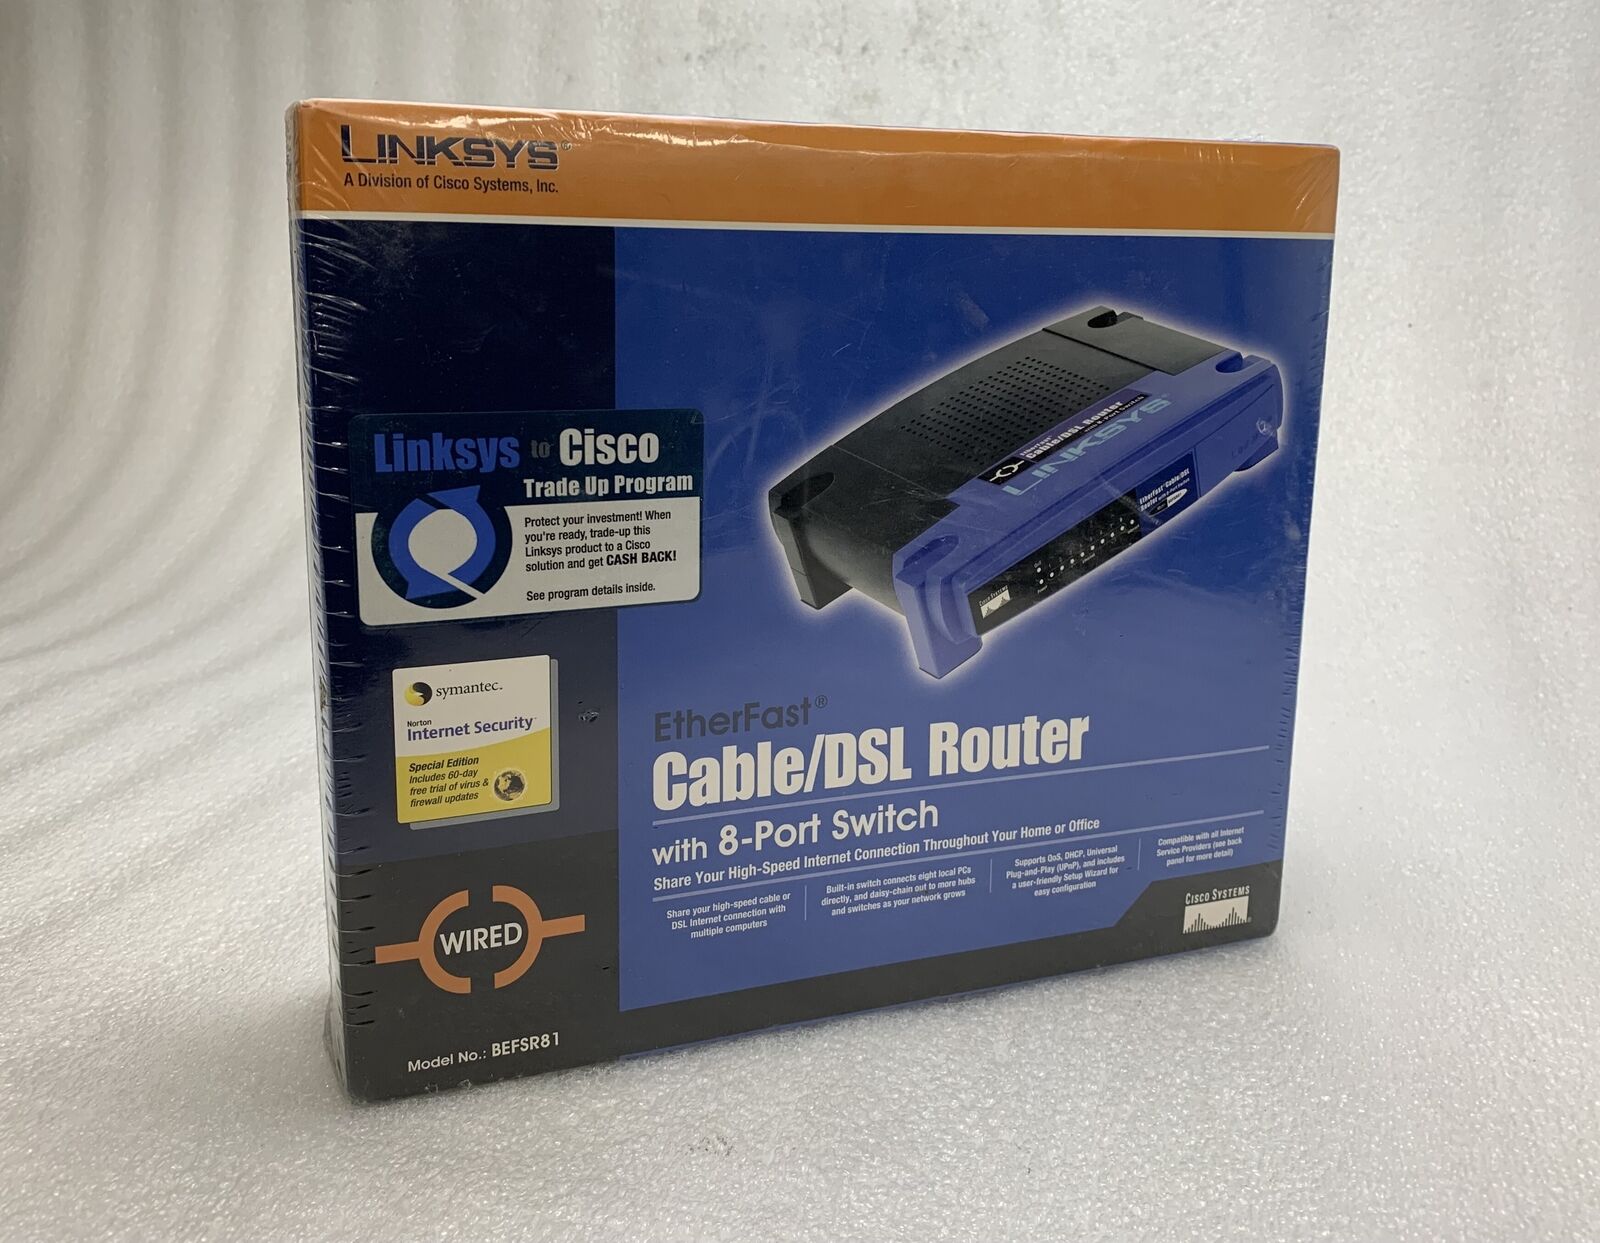 NEW LINKSYS Etherfast BEFSR81 8-Port Wired Cable DSL Router SEALED IN BOX